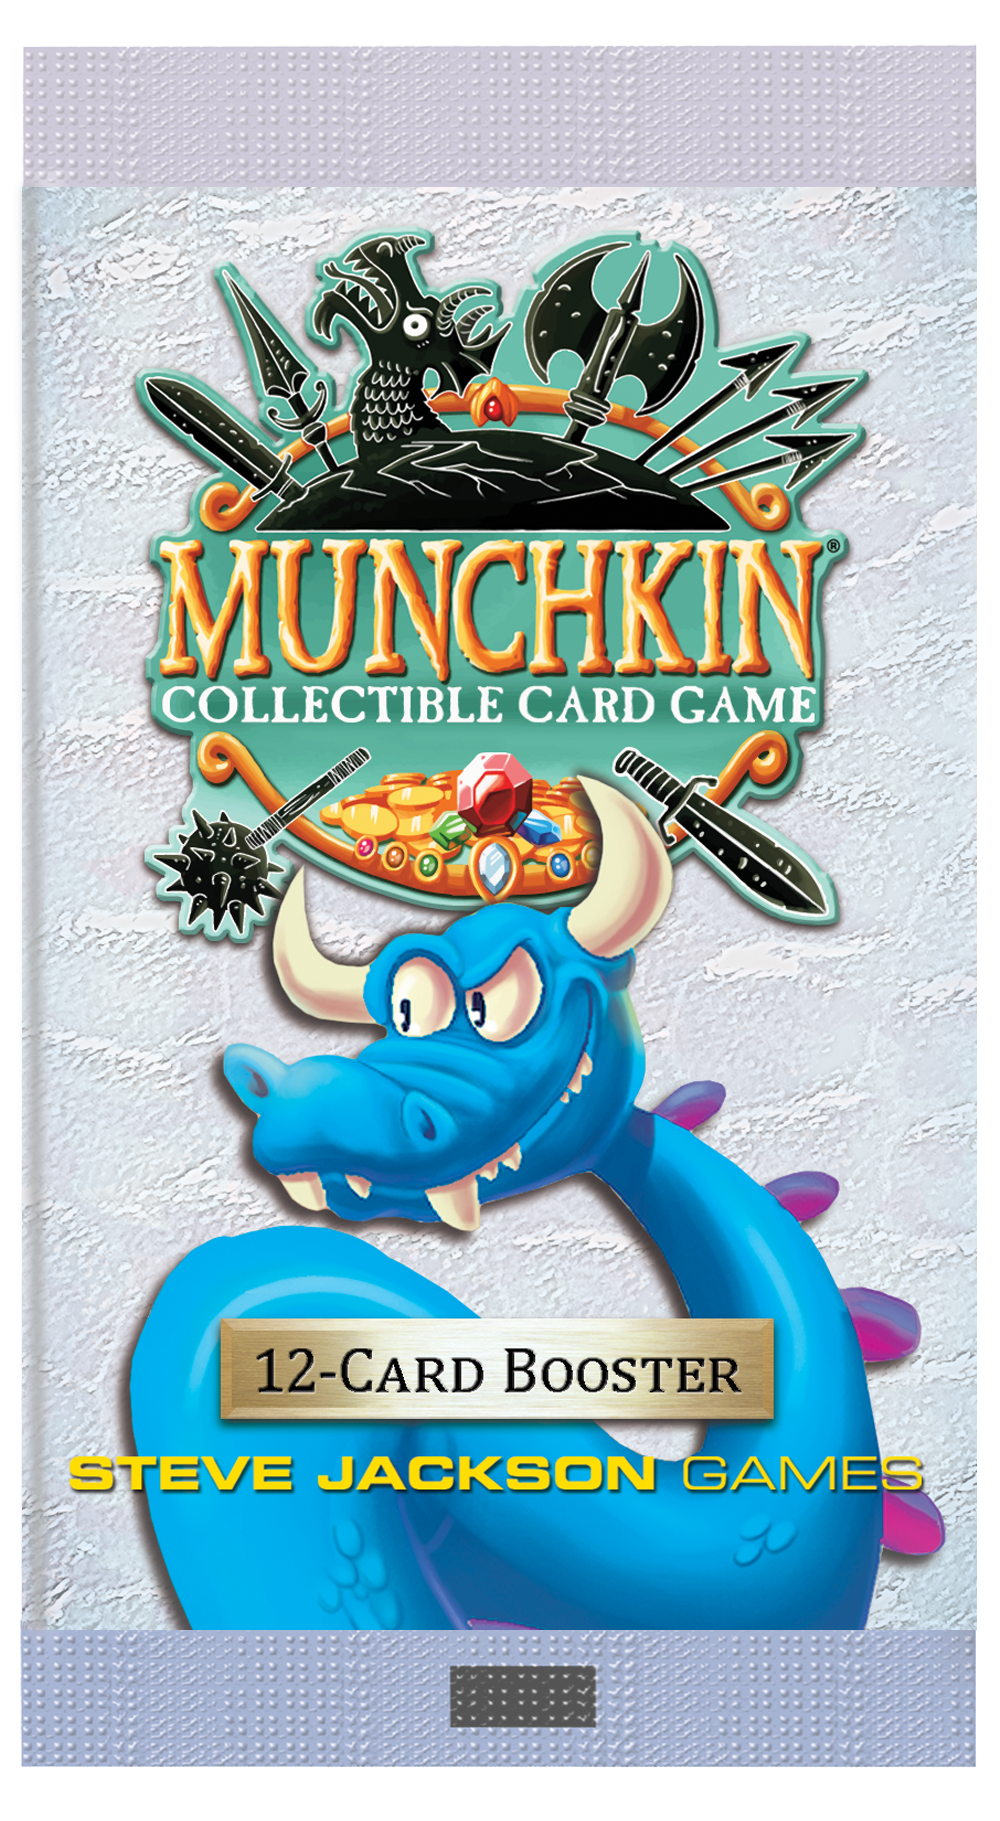 Munchkin Collectible Card Game Booster